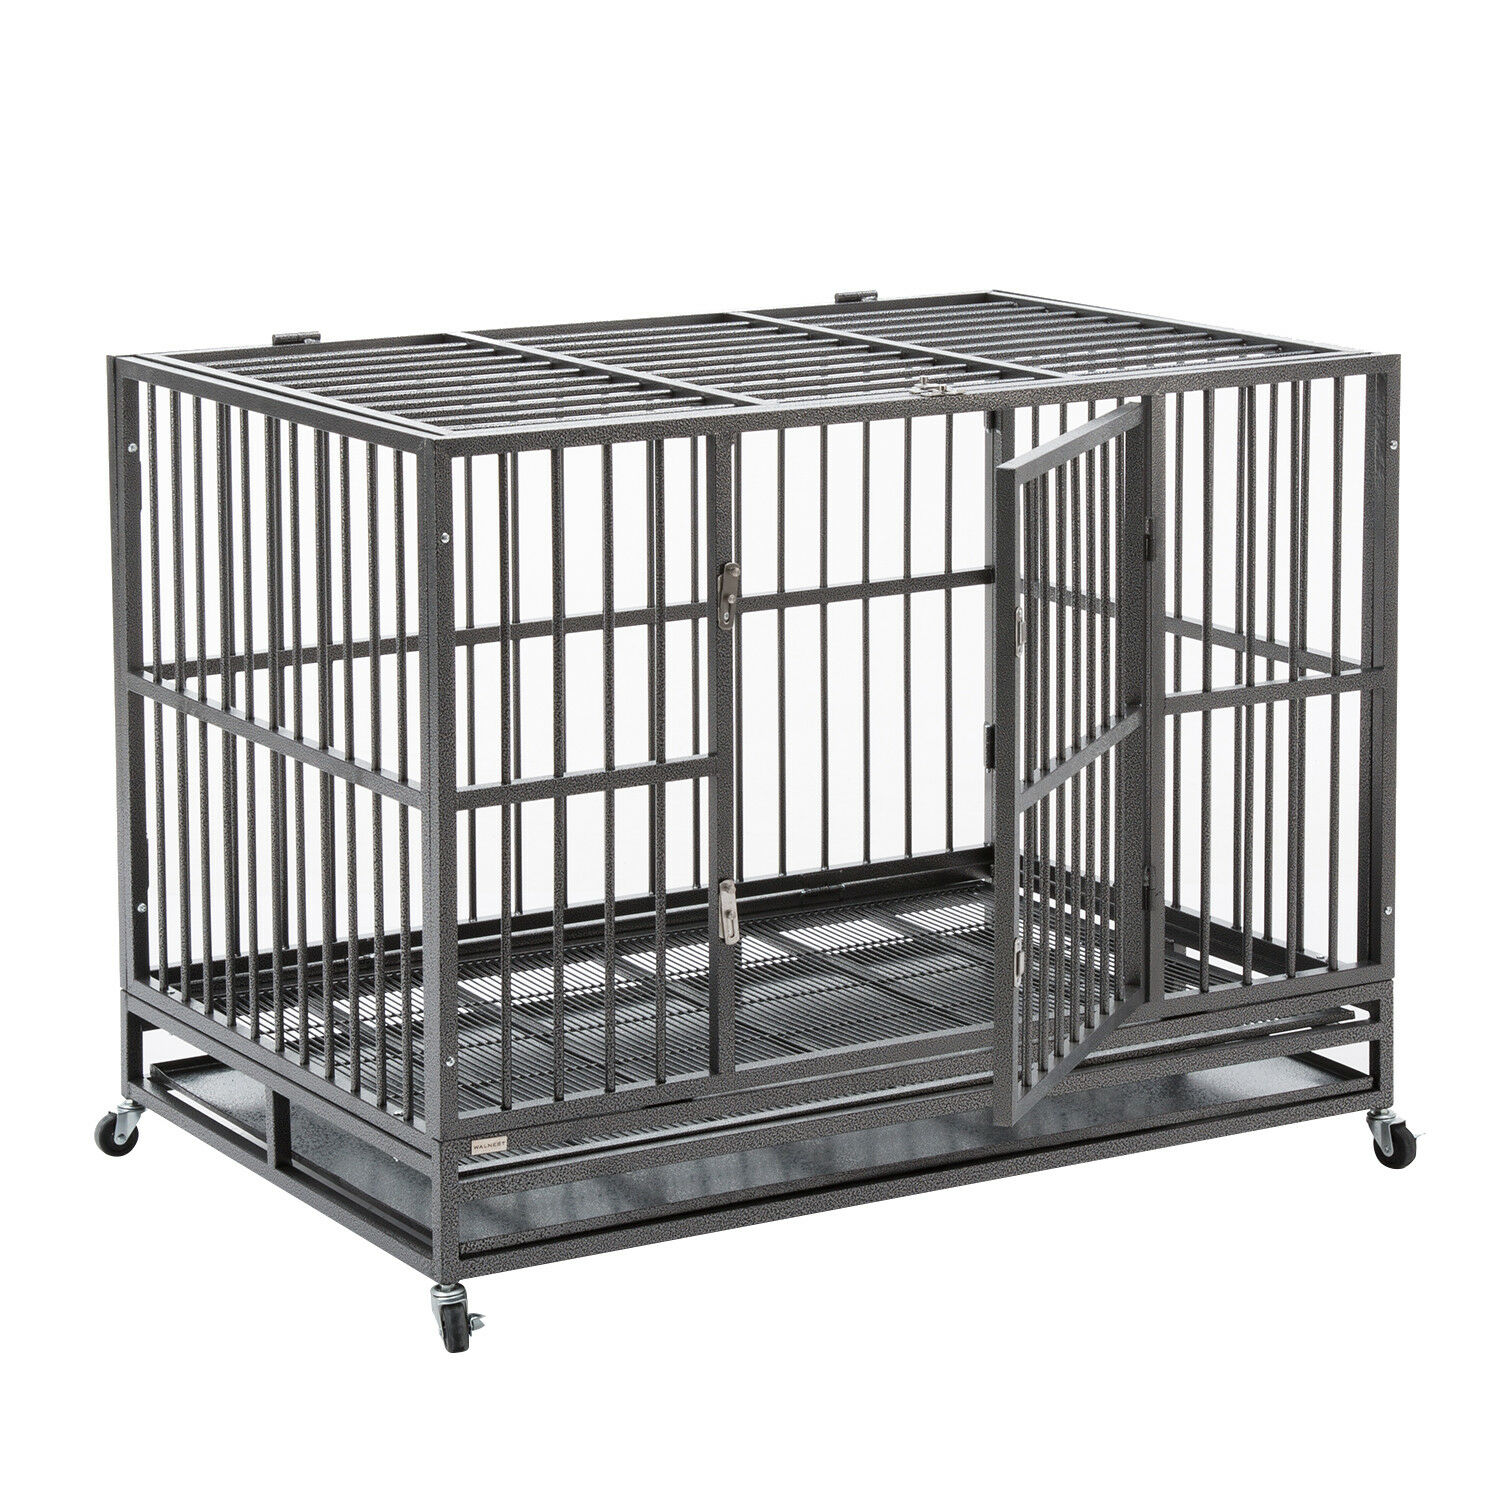 Xxl 48" Heavy Duty Pet Dog Cage Strong Metal Crate Kennel Playpen W/ Wheels&tray